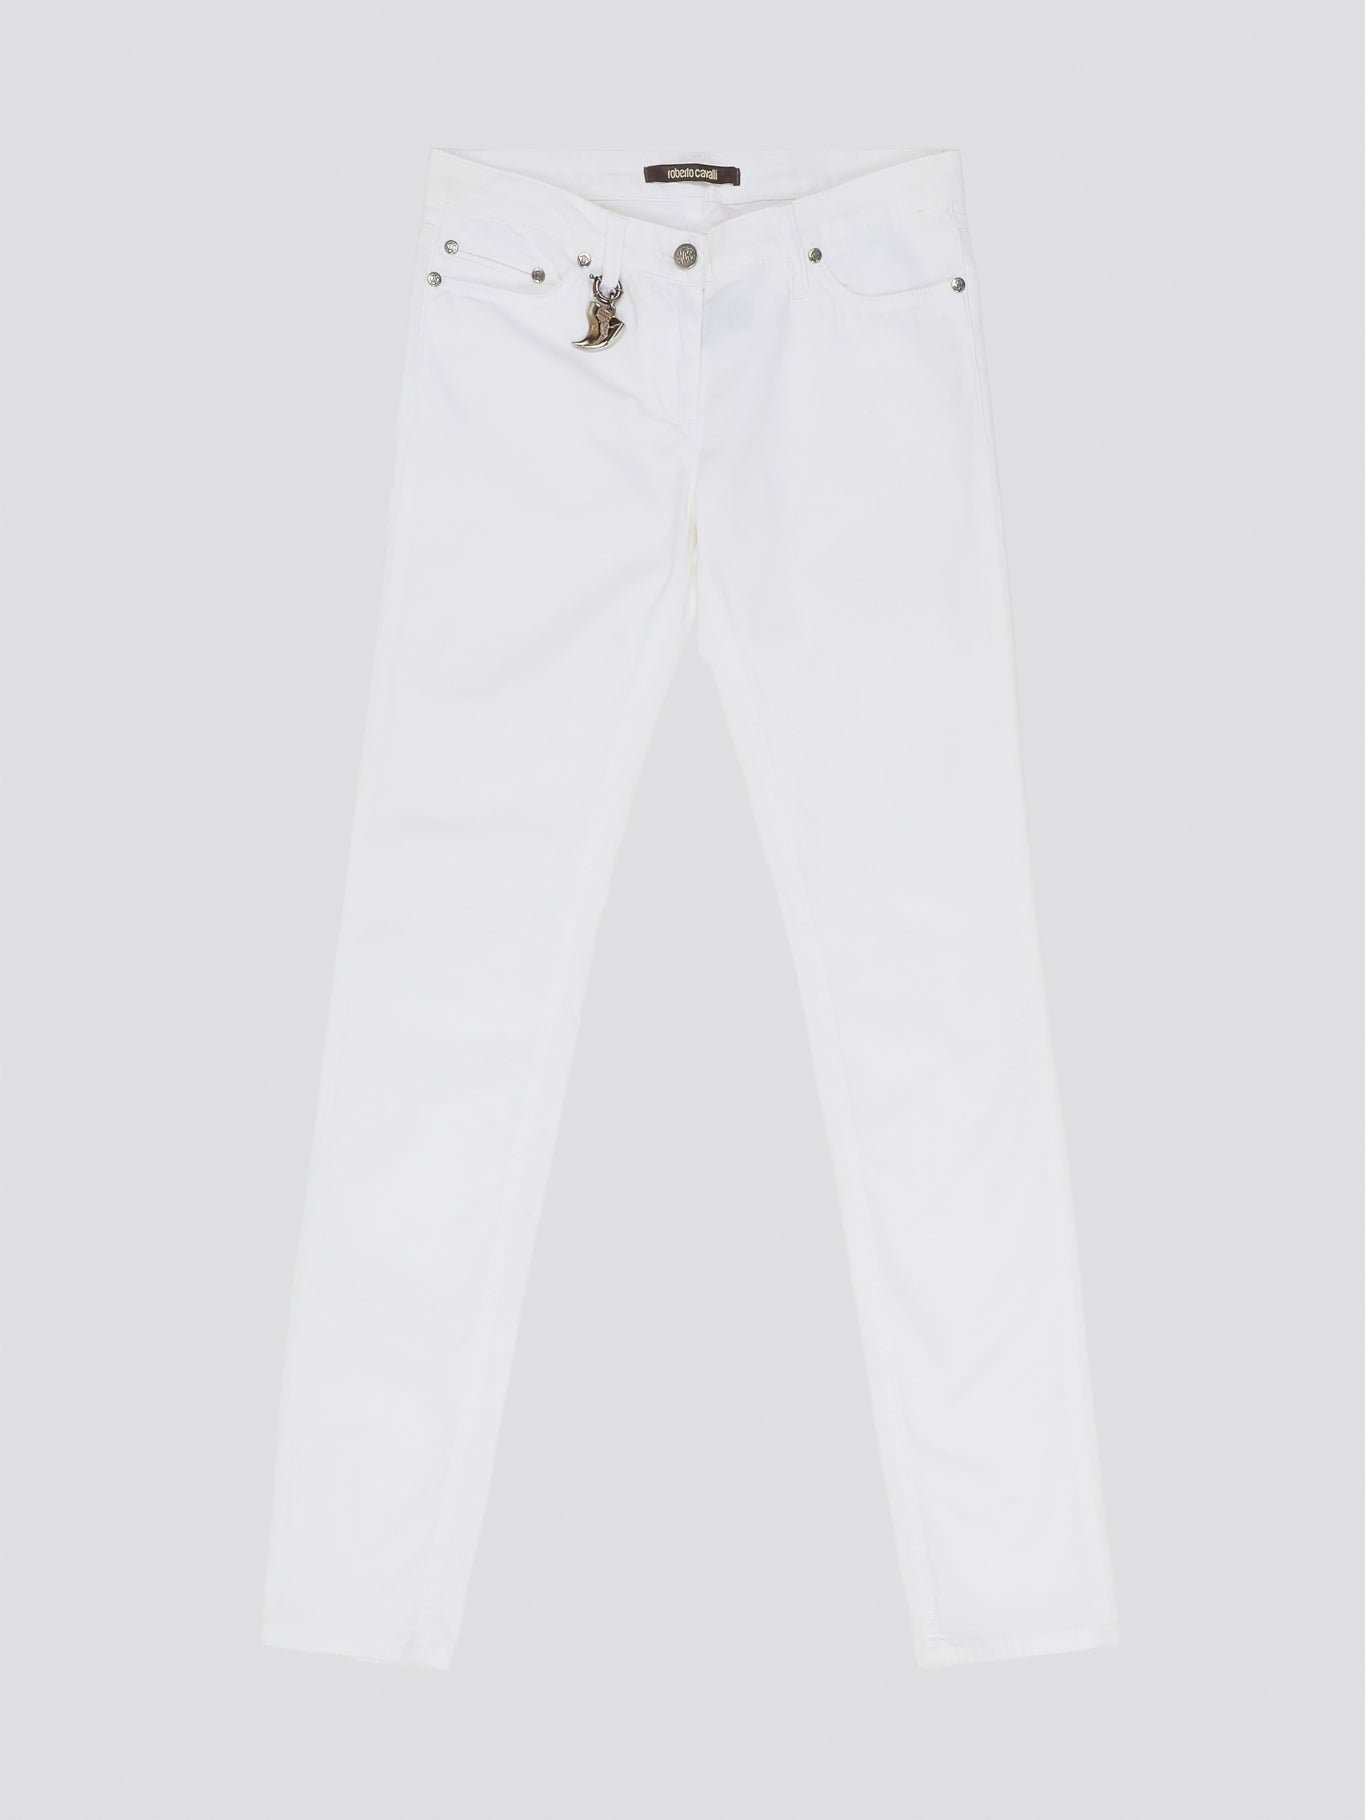 Indulge in timeless elegance and modern sophistication with these White Straight Leg Jeans by Roberto Cavalli. Crafted with precision and attention to detail, these jeans feature a sleek silhouette that effortlessly complements any ensemble. Elevate your everyday wardrobe with a touch of luxury and style with these iconic Roberto Cavalli jeans.